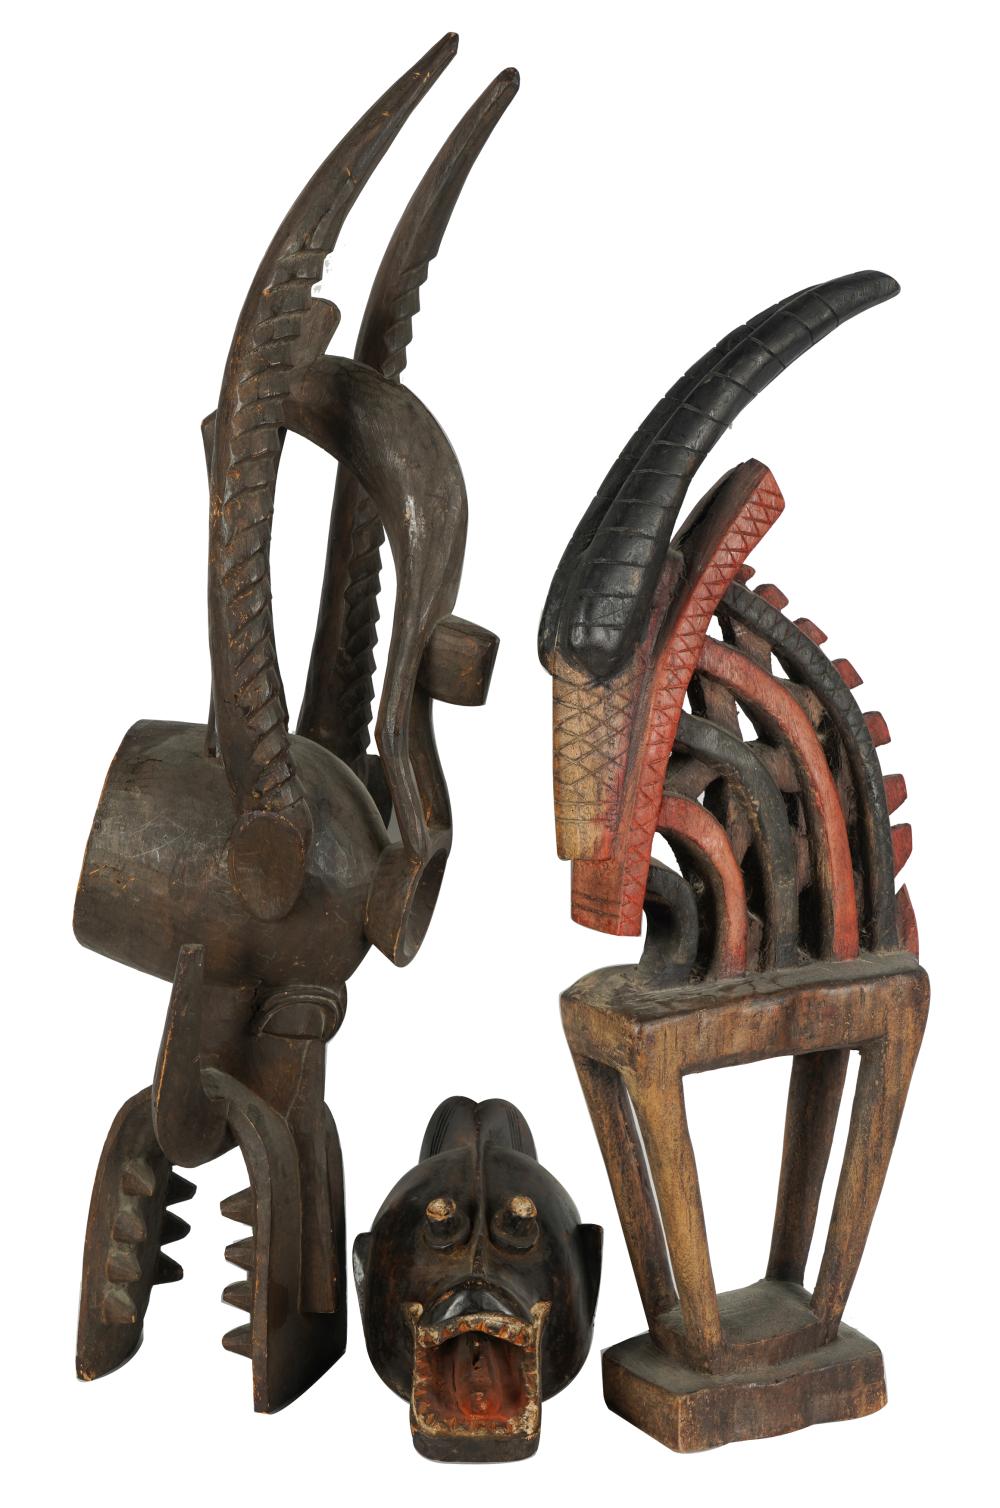 THREE AFRICAN PAINTED WOOD CARVINGScomprising 32456f